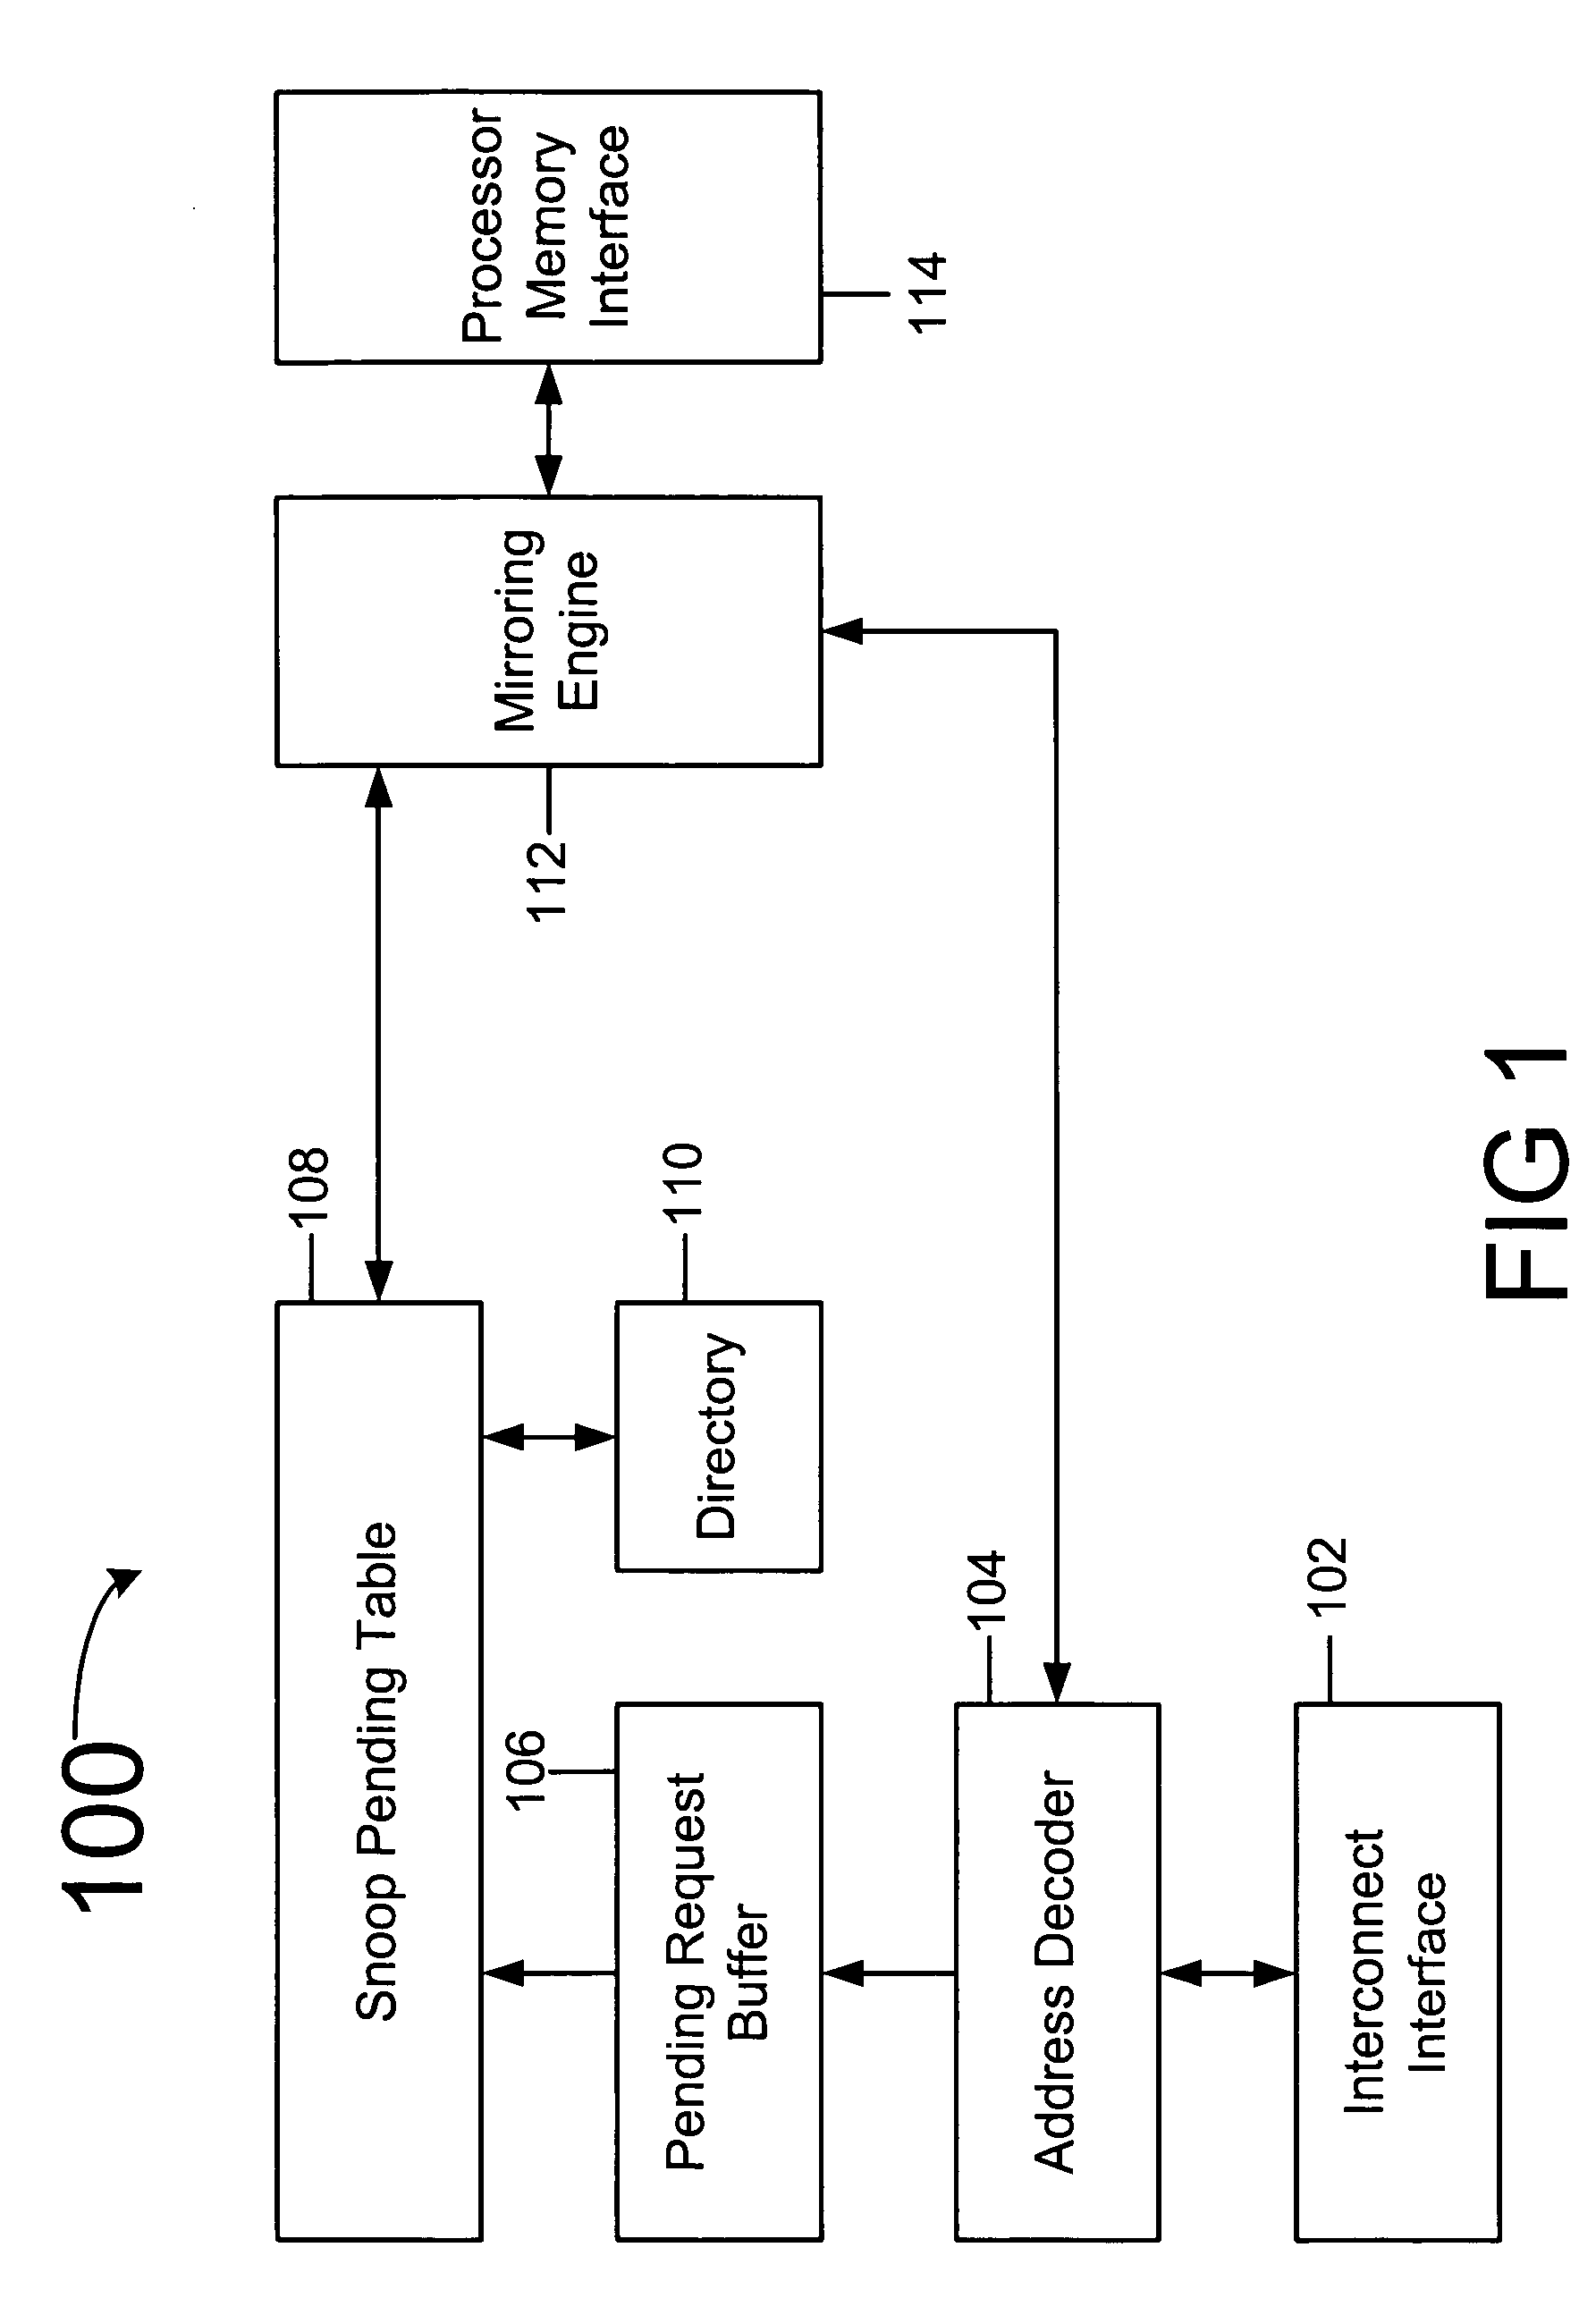 Synchronizing memory copy operations with memory accesses